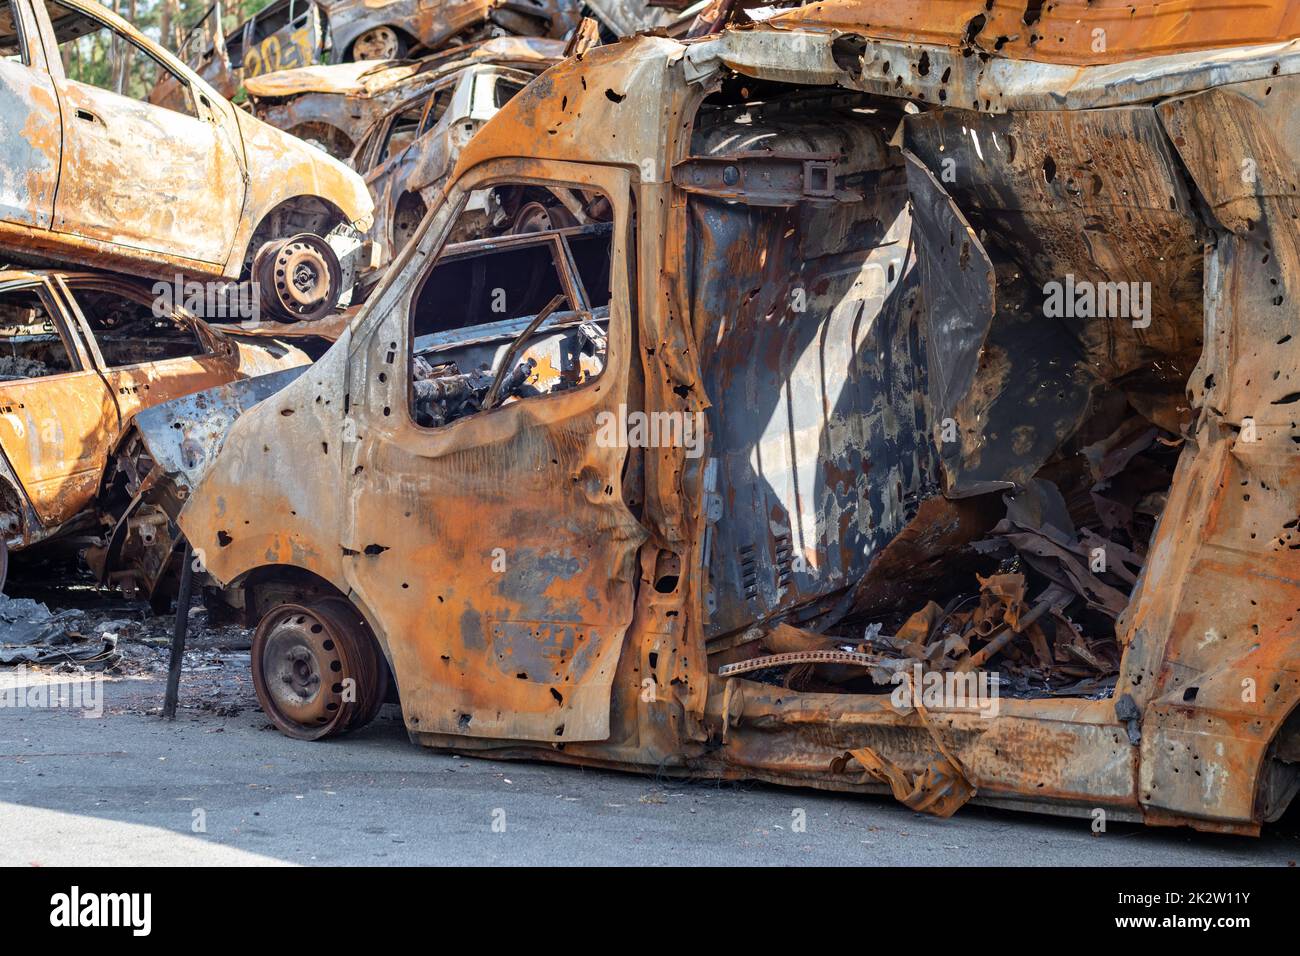 Cars after the fire. Iron parts of a burnt car. Burnt-out cars abandoned on the side of a quiet countryside. Explosion, the result of a fire. Car insurance concept. War of Russia against Ukraine. Stock Photo